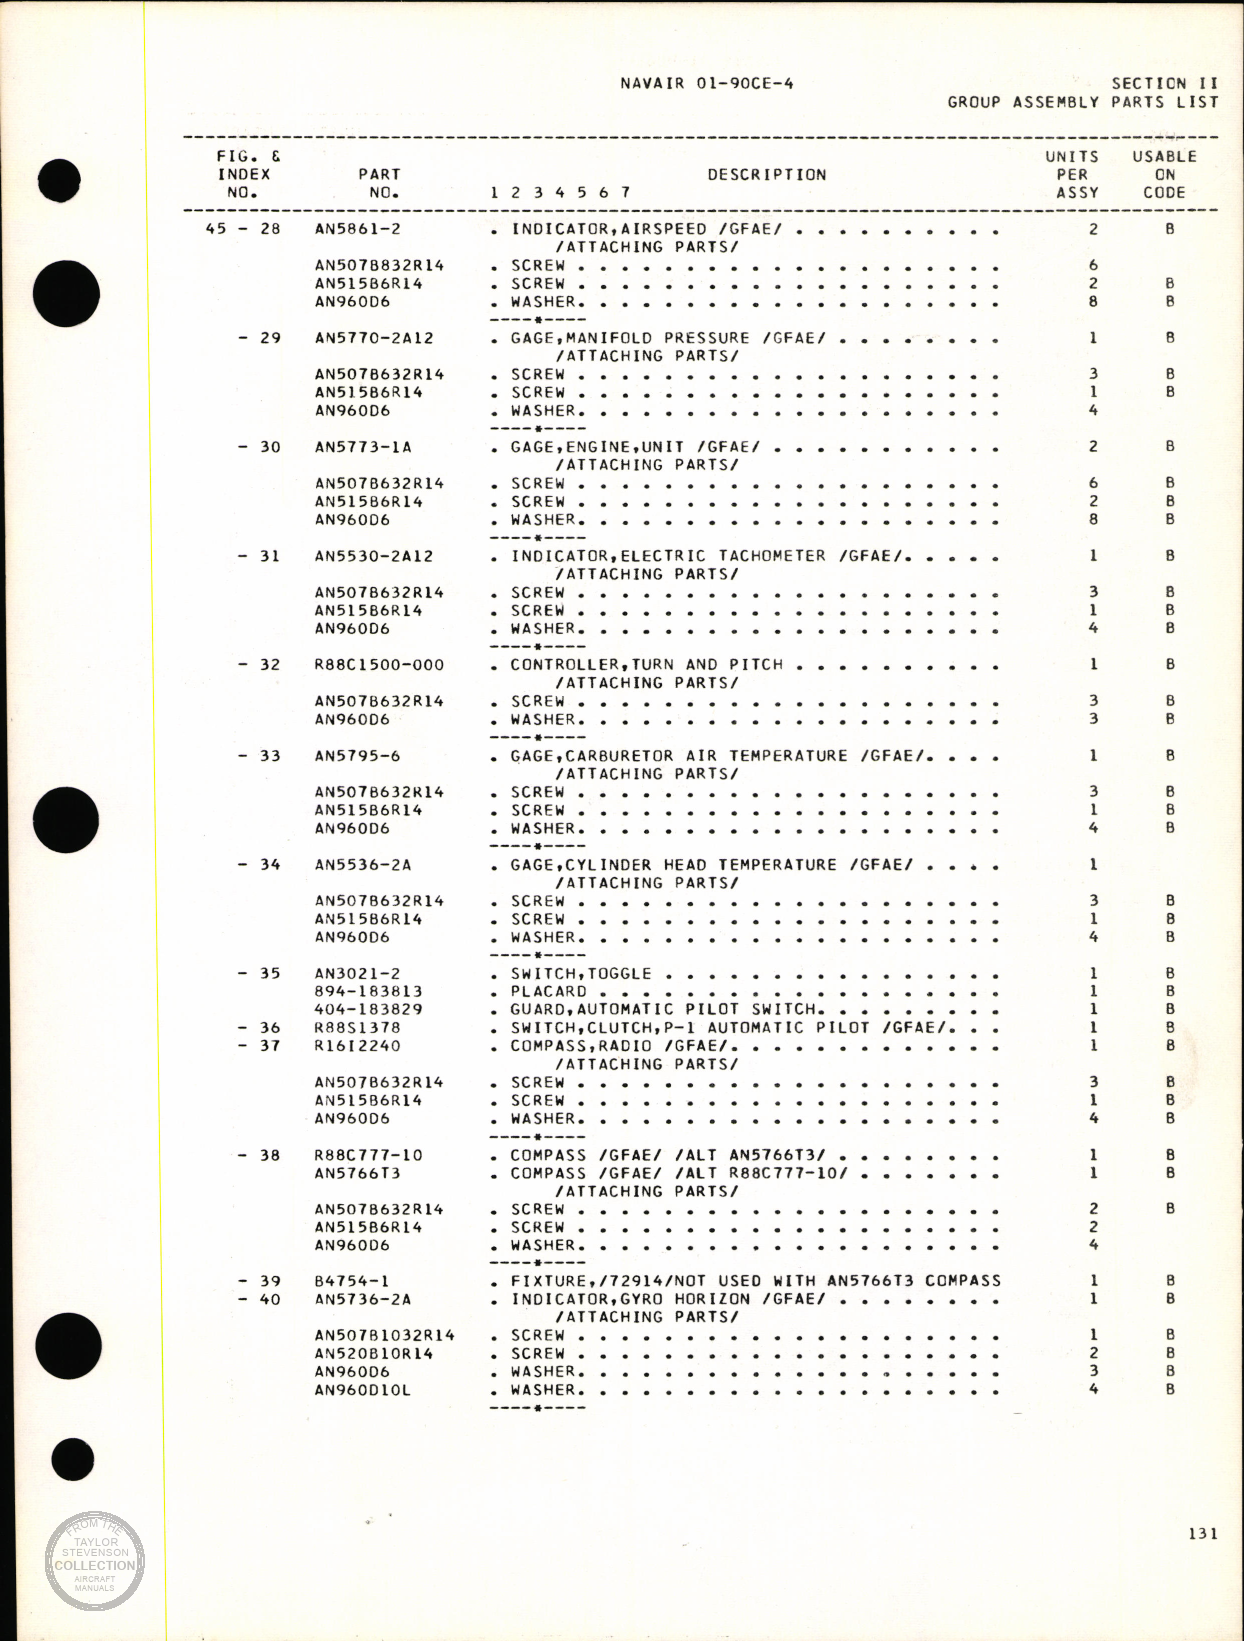 Sample page 134 from AirCorps Library document: Illustrated Parts Breakdown, C-45